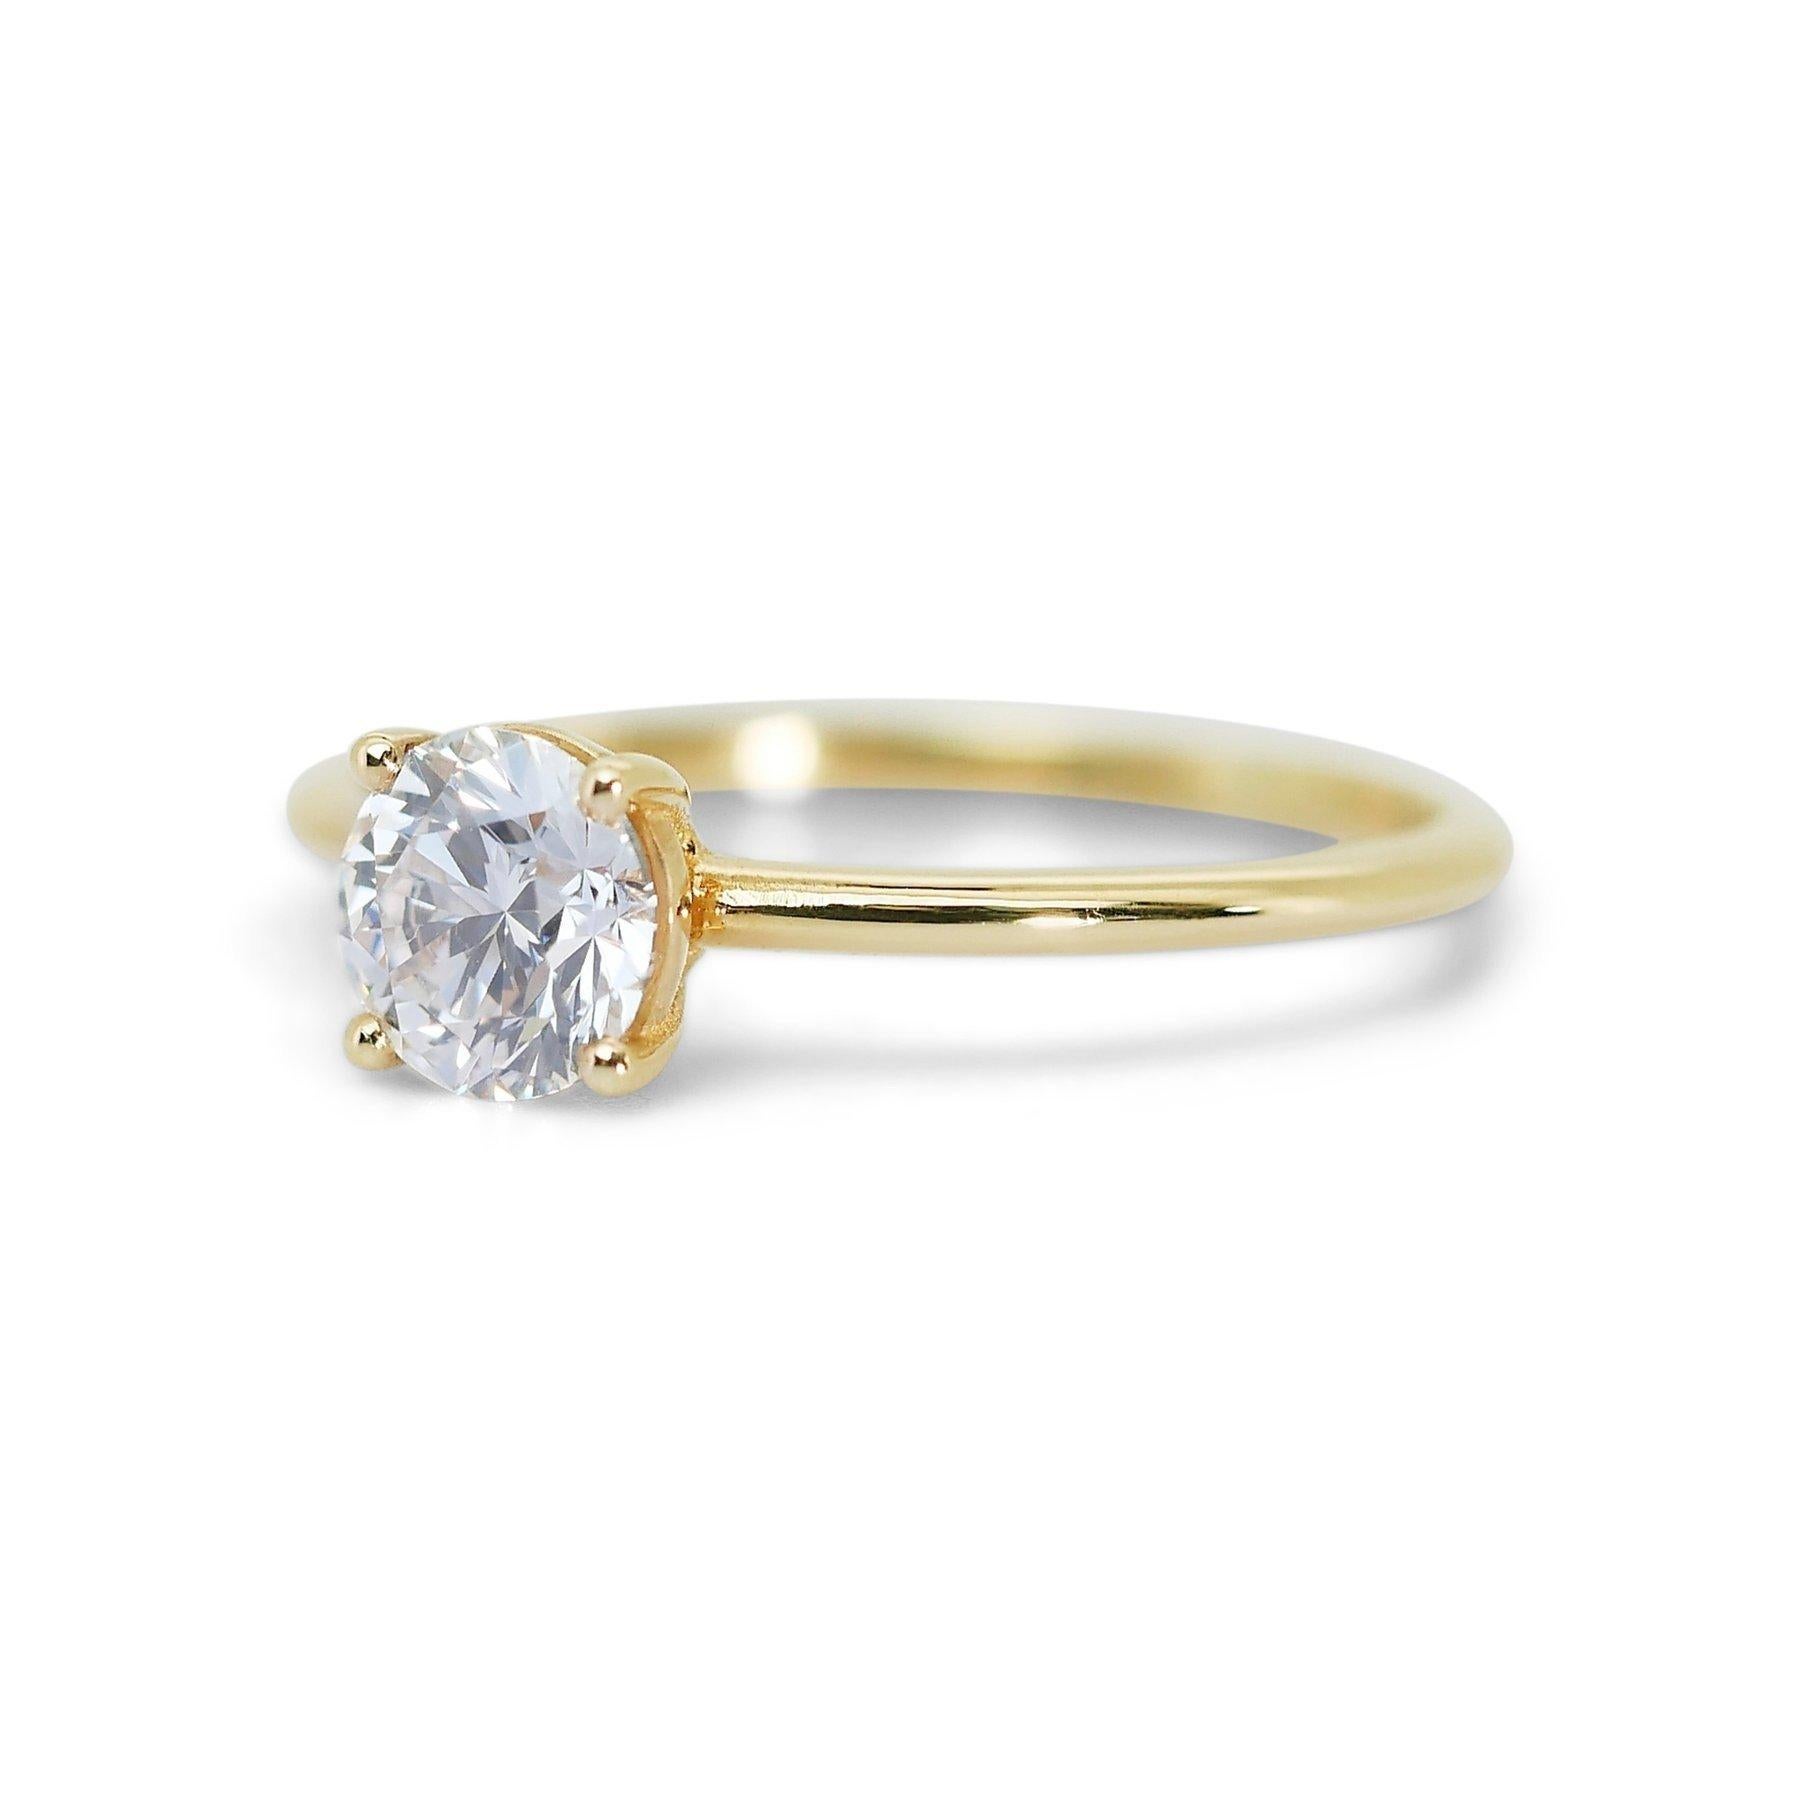 Radiant 1.02ct Round Solitaire Diamond Ring in 18k Yellow Gold - GIA Certified In New Condition For Sale In רמת גן, IL